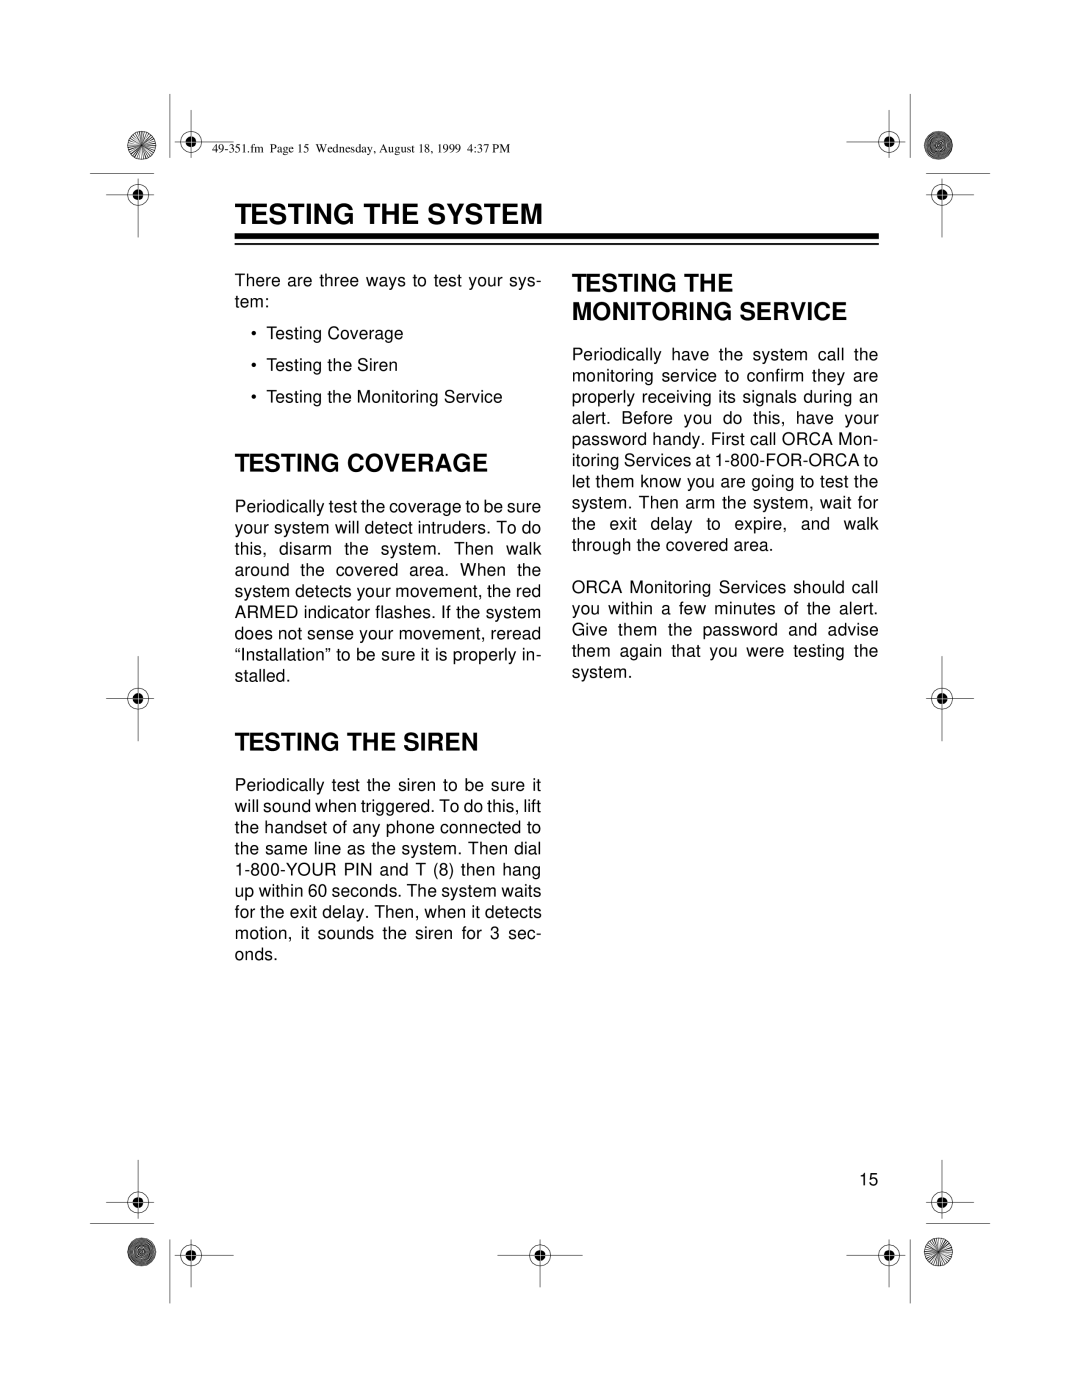 Radio Shack 49-351 owner manual Testing The System, Testing Coverage, Testing The Monitoring Service, Testing The Siren 